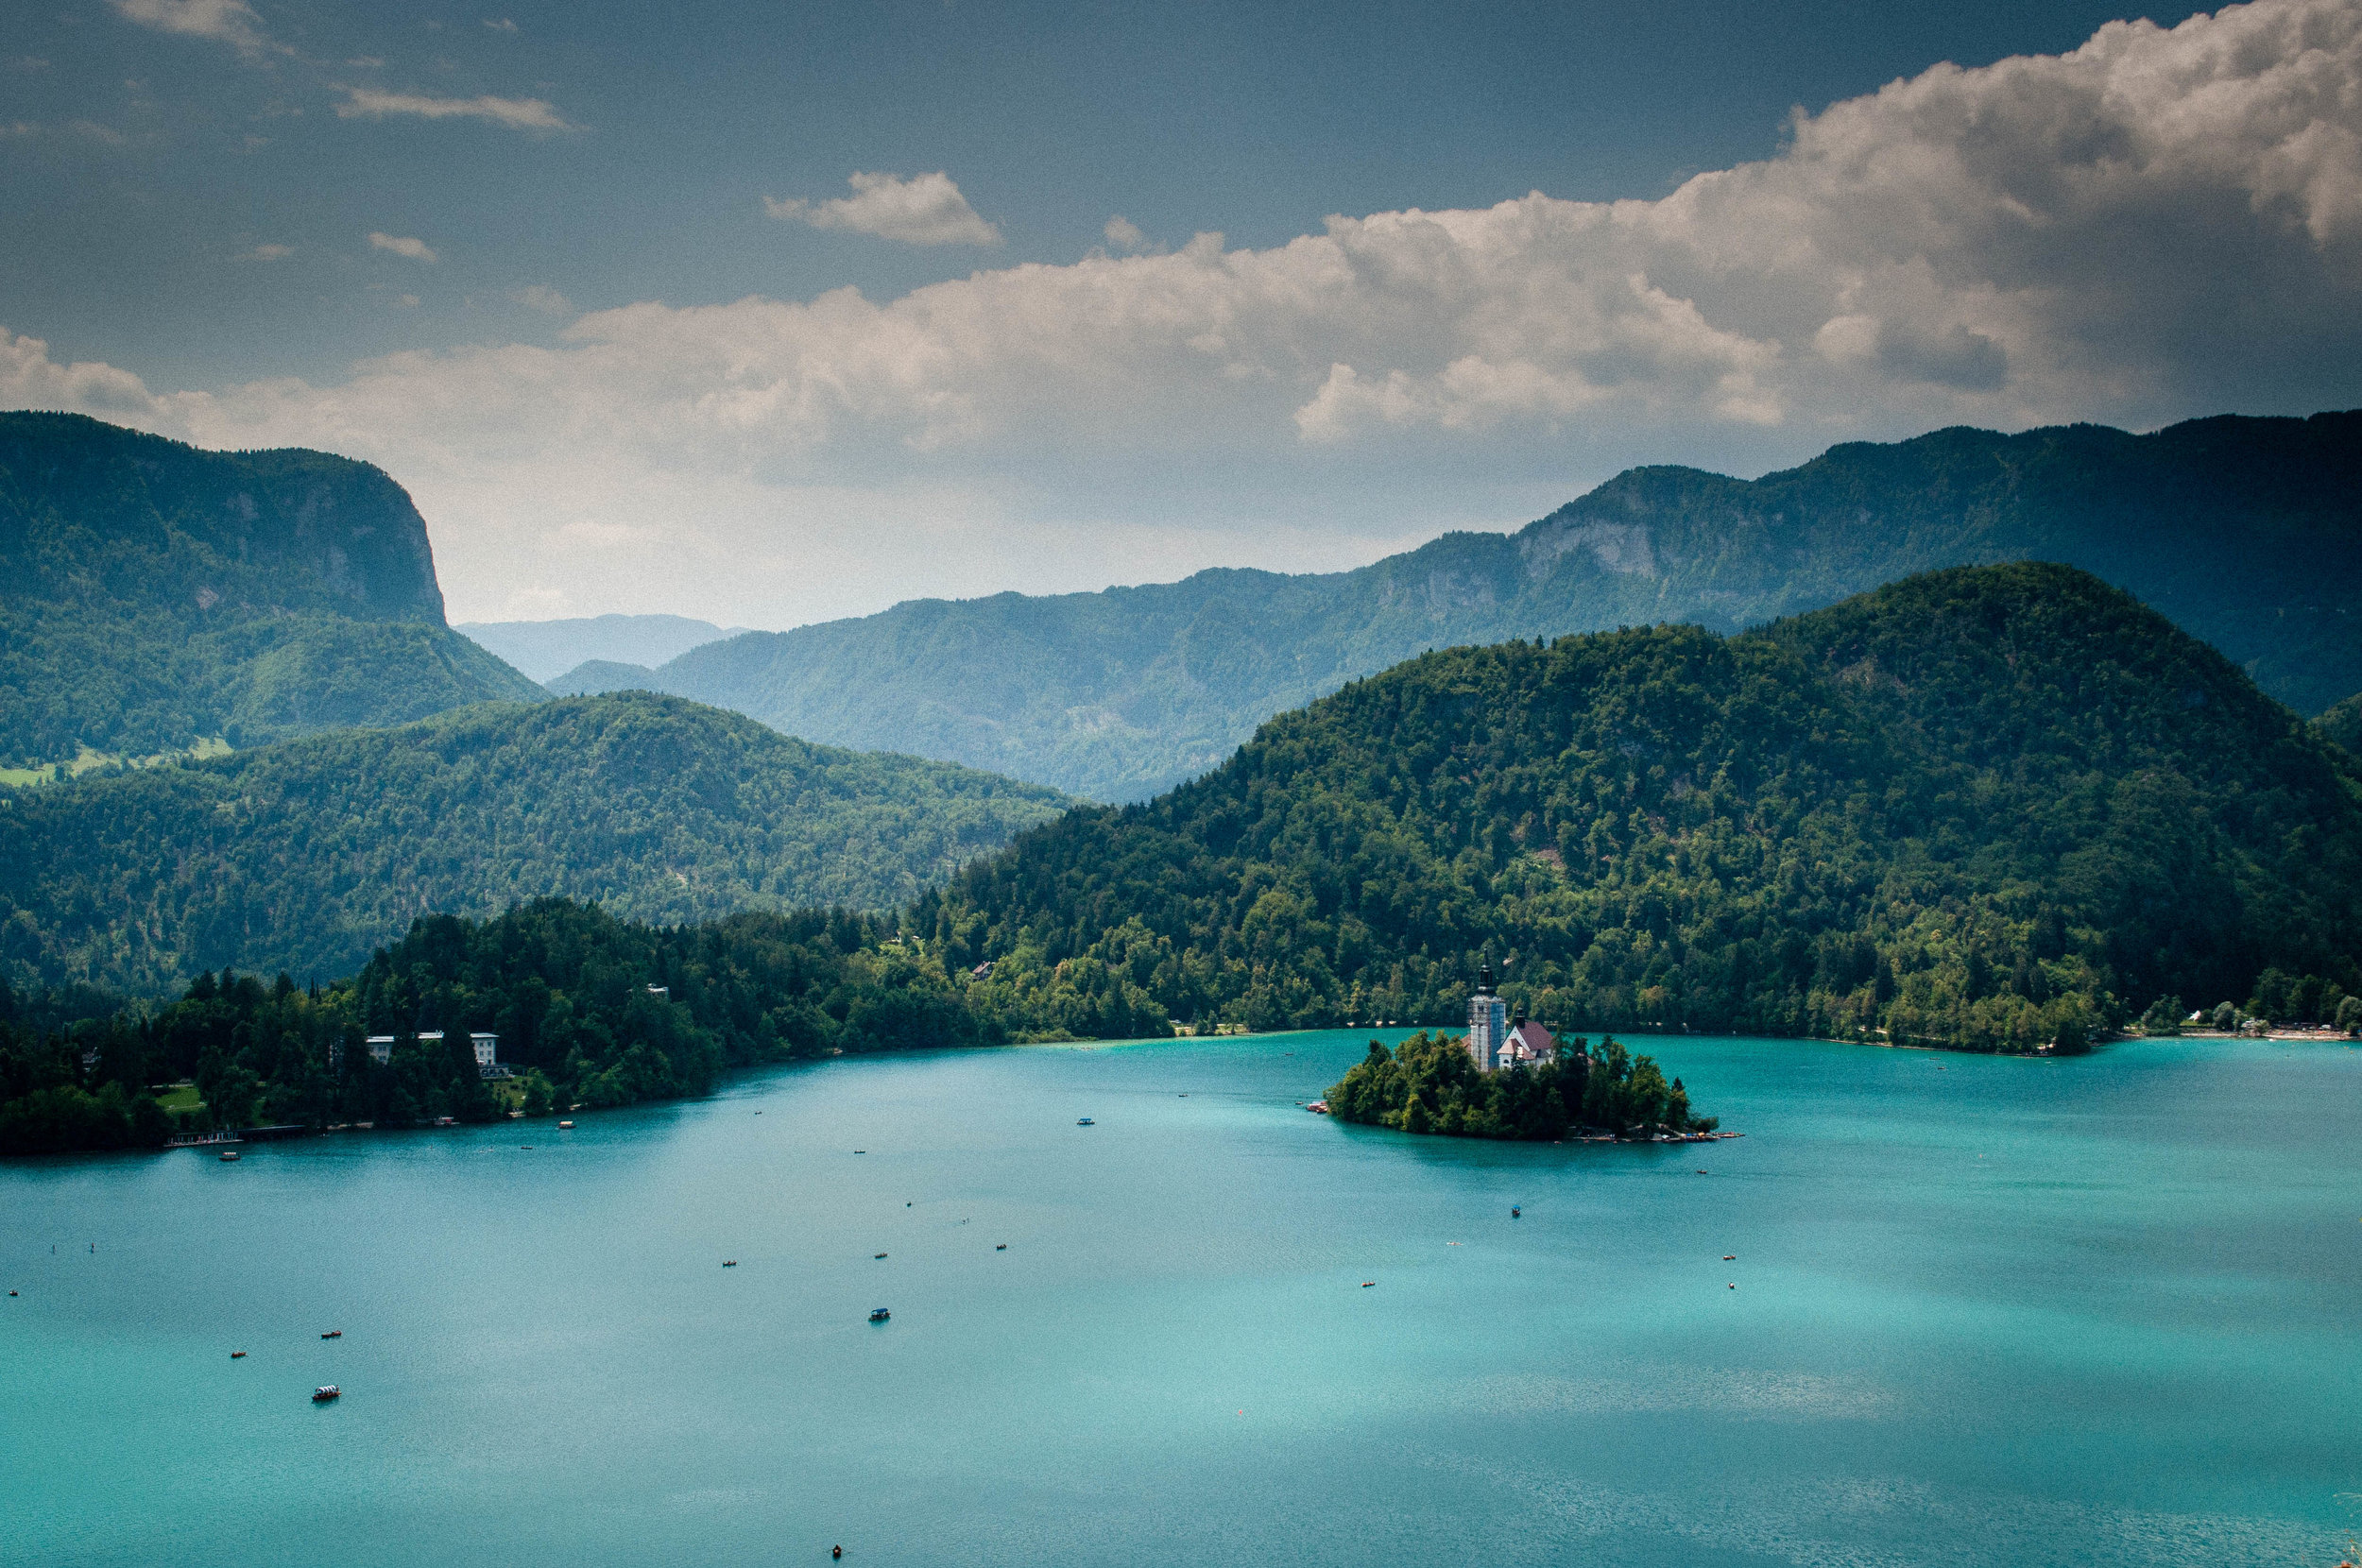 Lake Bled, part of the itinerary Road trip in Slovenia 